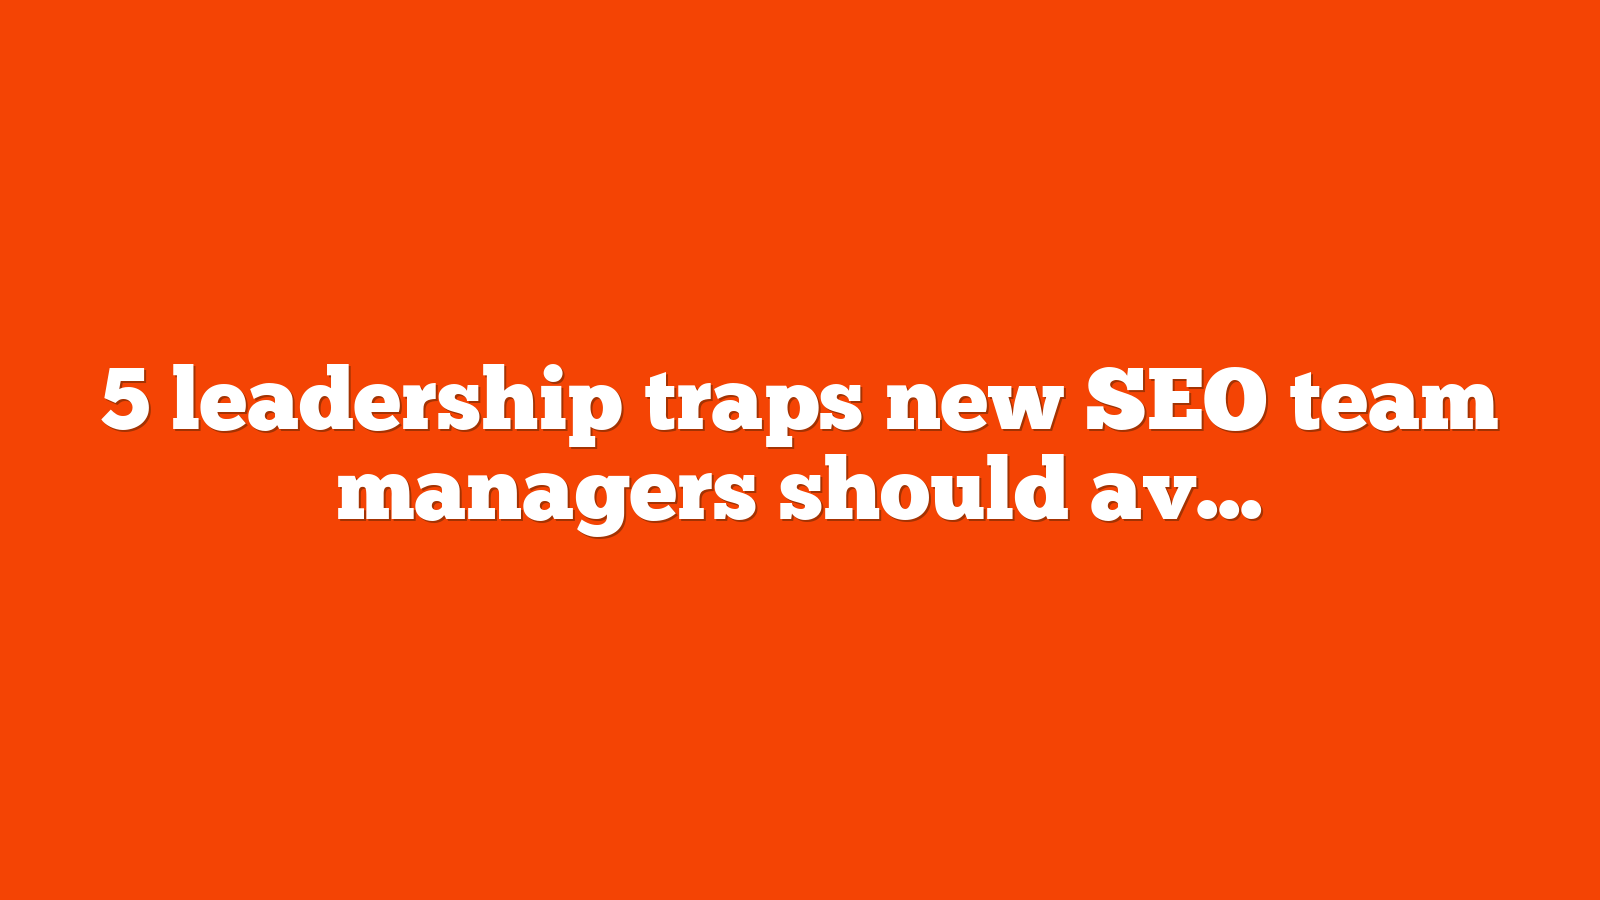 5 leadership traps new SEO team managers should avoid